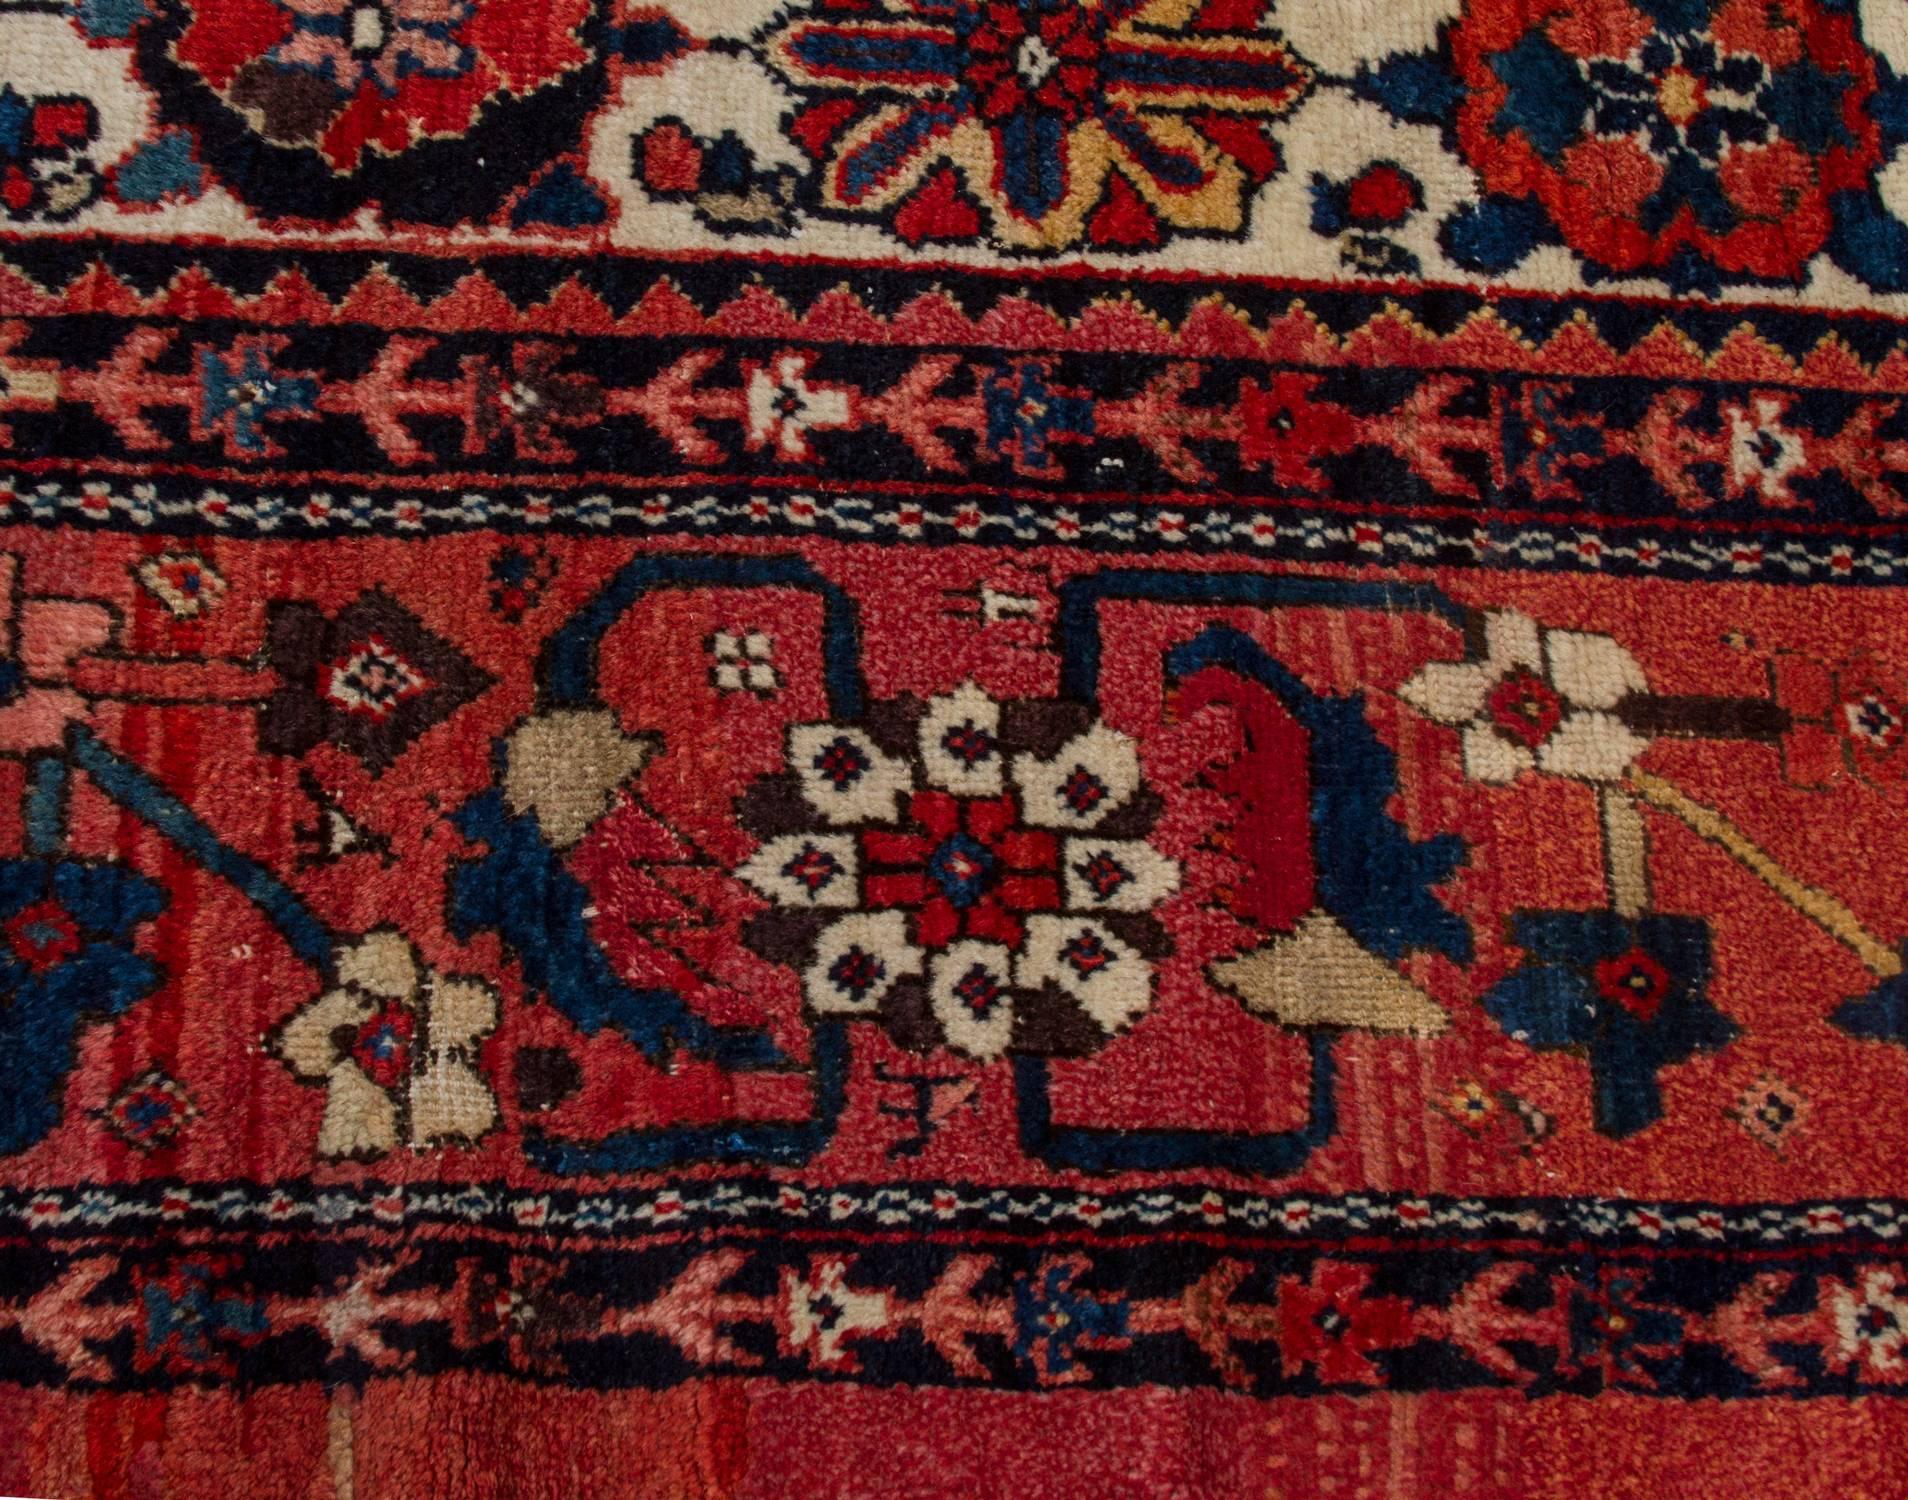 This is a spectacular wool rug. Once owned by Hugh Hudson, it is an incredible example of Mina Khani design on a Mahal Rug. 
The floral design on a white field is surrounded by a crimson floral style border. 
Mina Khani design is known for its